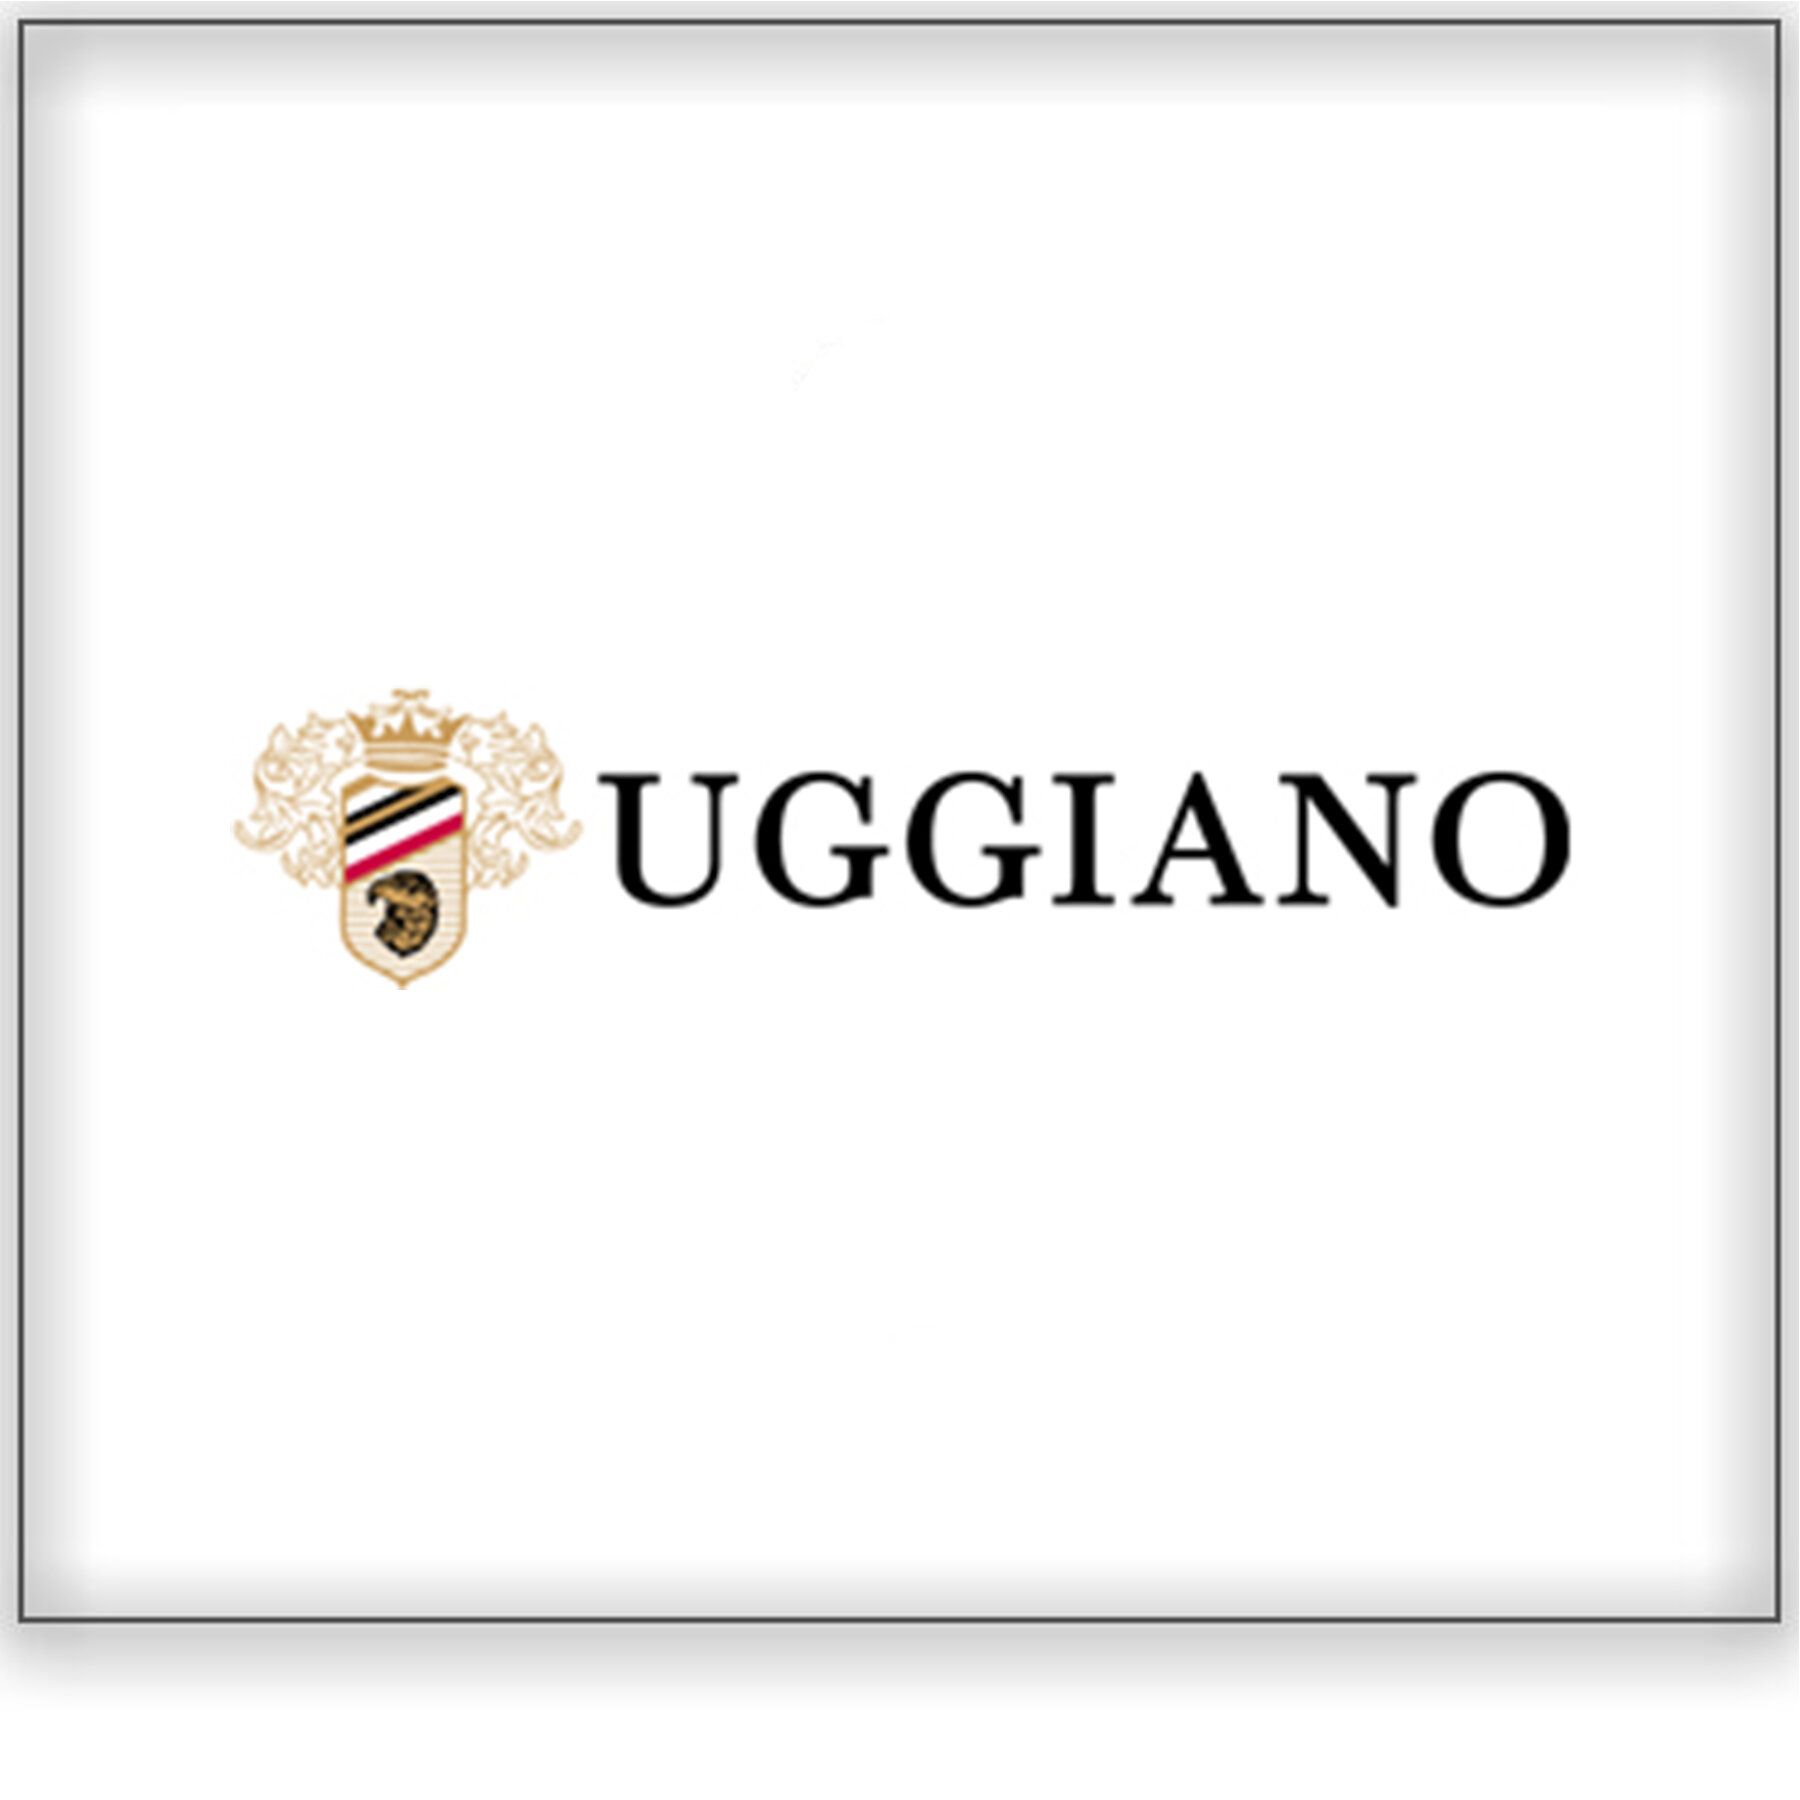 Uggiano&lt;a href=/uggiano&gt;Tuscany, Italy ➤&lt;/a&gt;